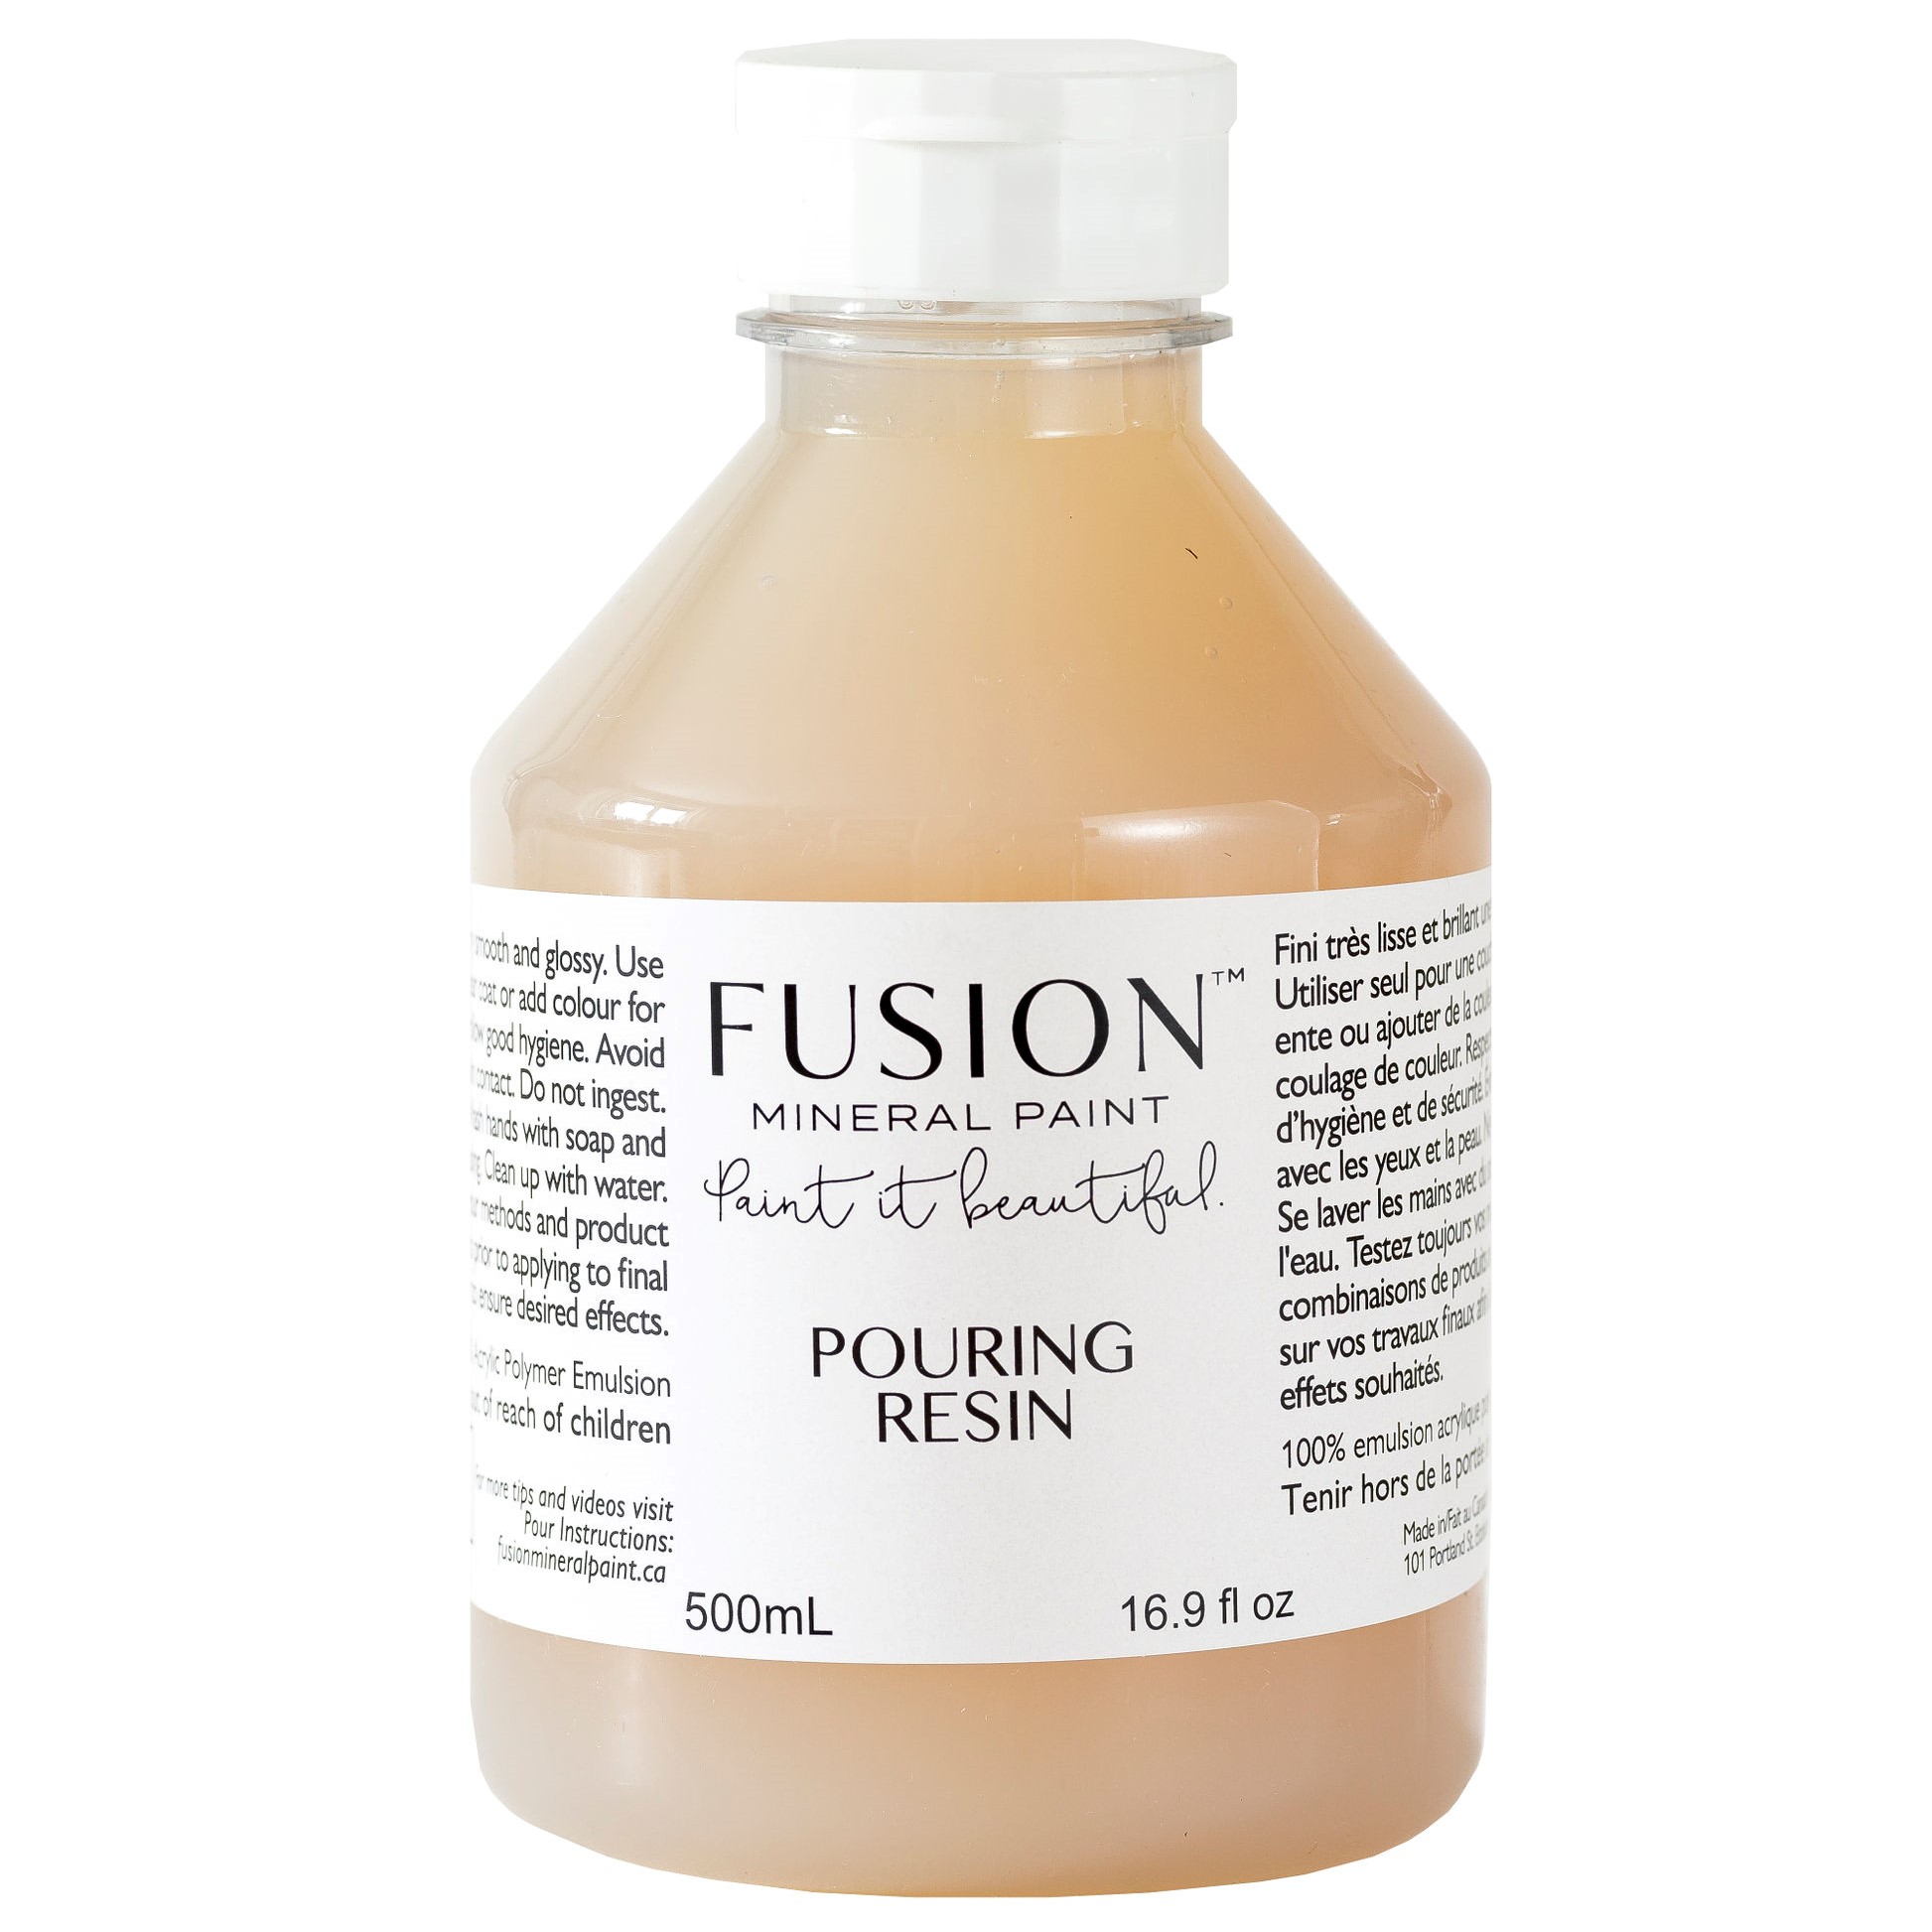 Pouring Resin art fusion mineral paint goed gestyled brielle